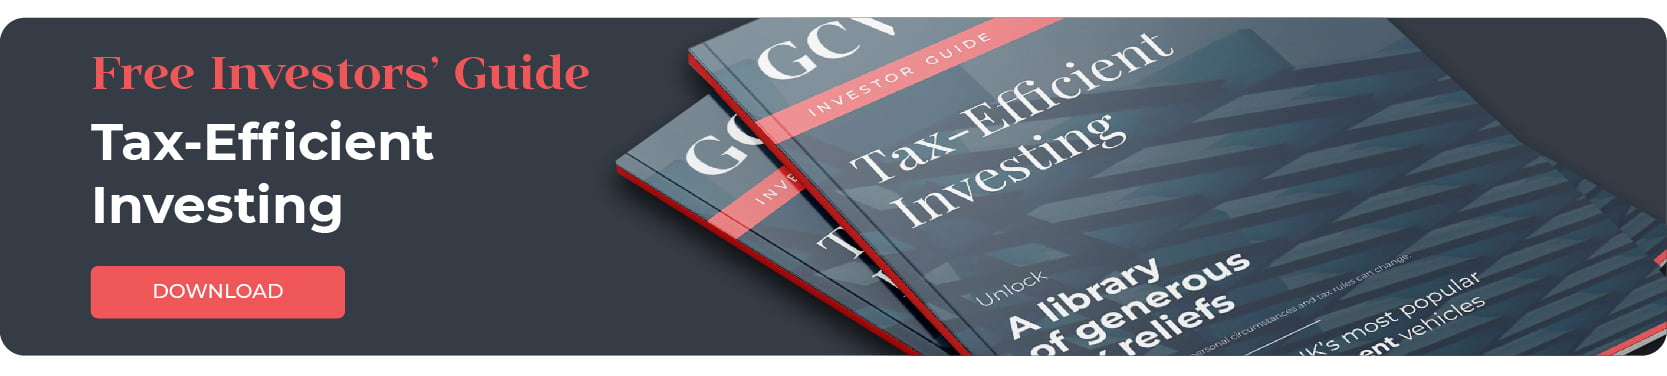 TGCV tax efficient investing guide